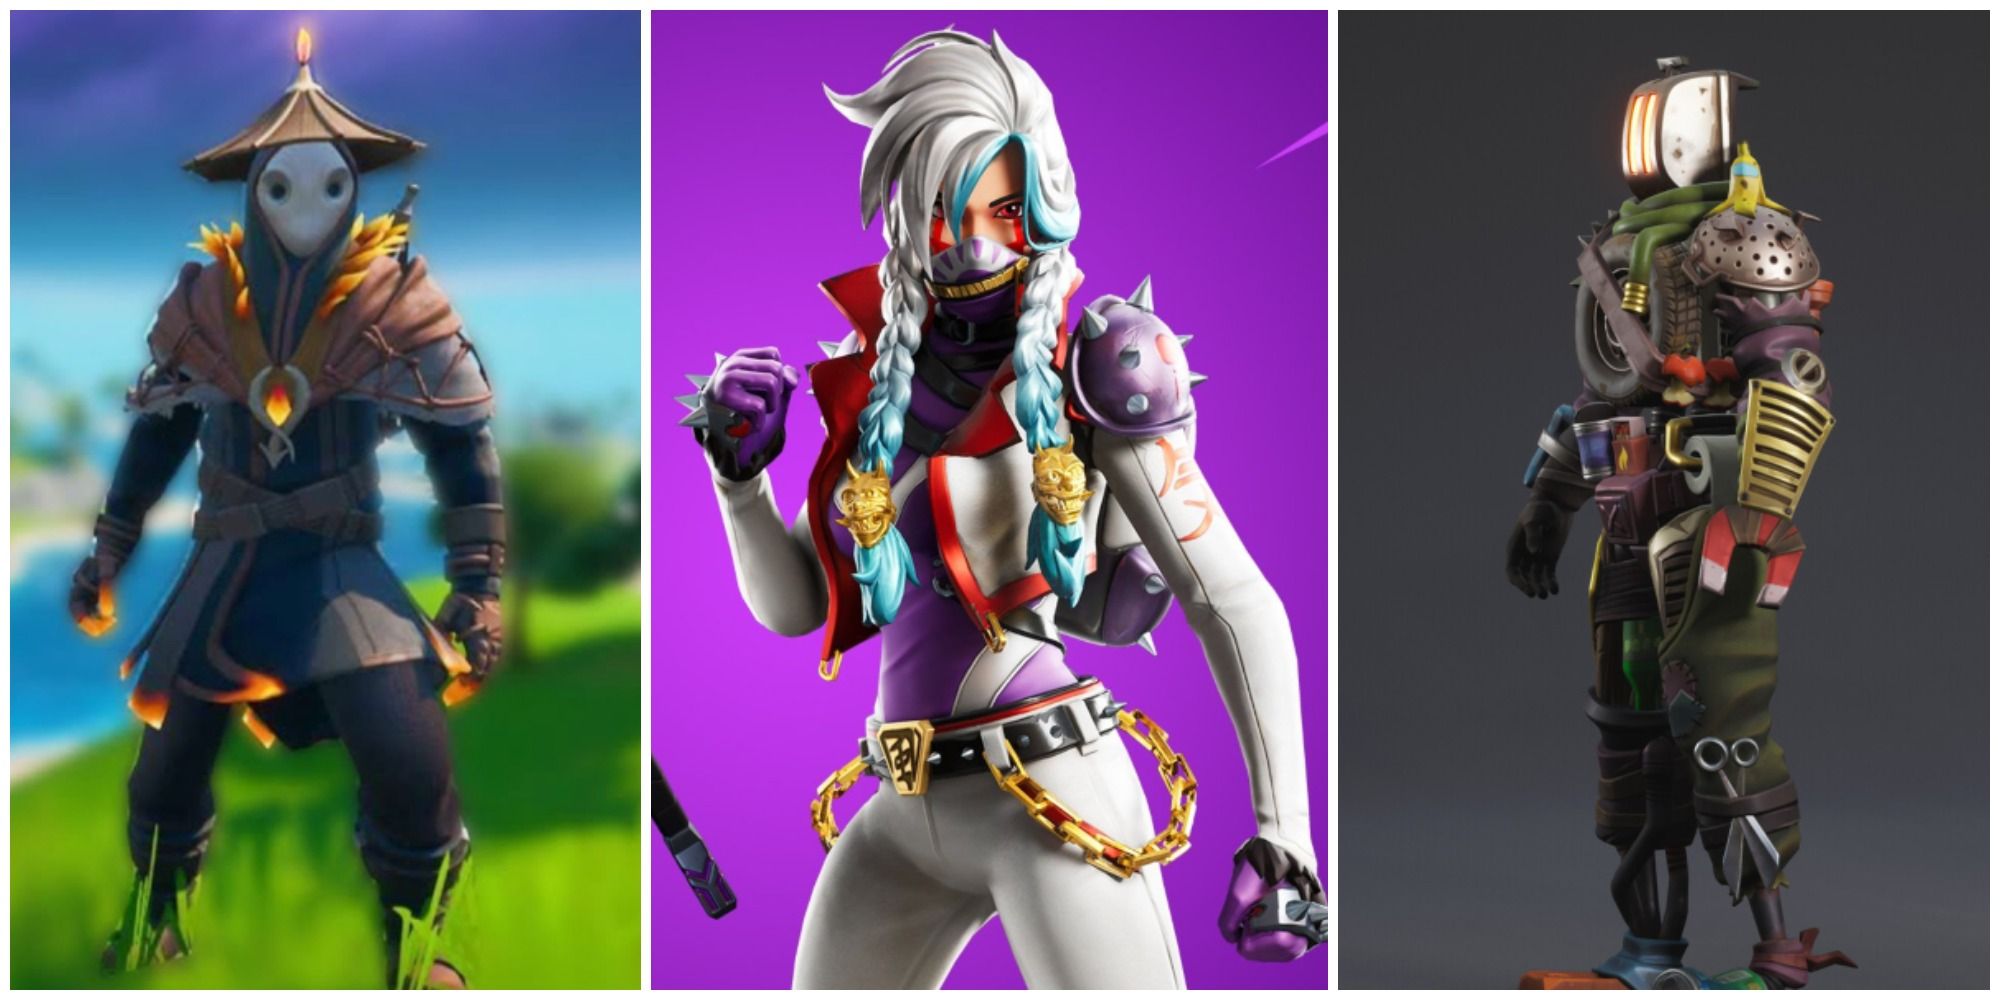 A collage of three different skins featured in the article.